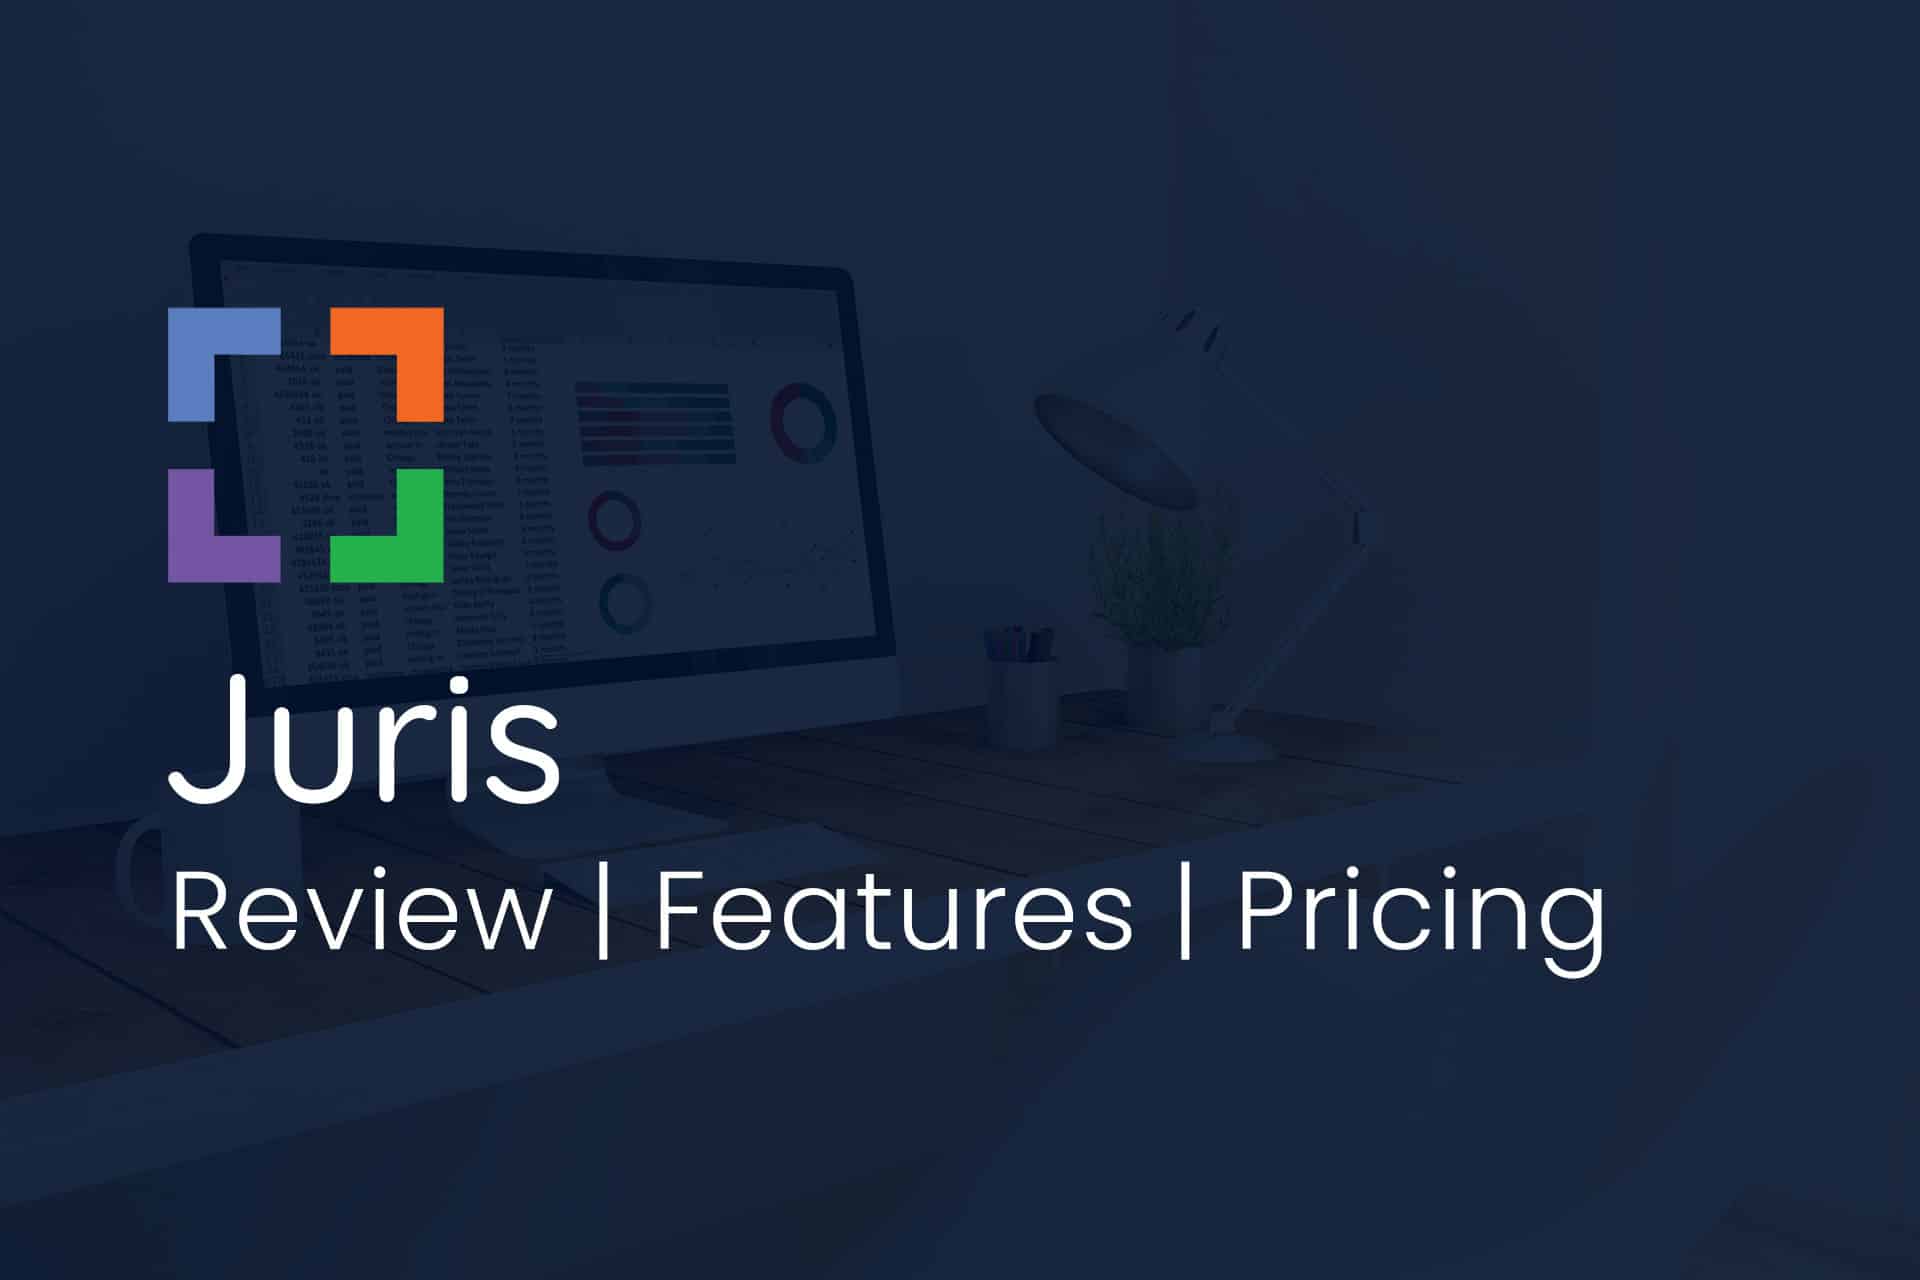 Juris: Complete Review, Features, Pricing